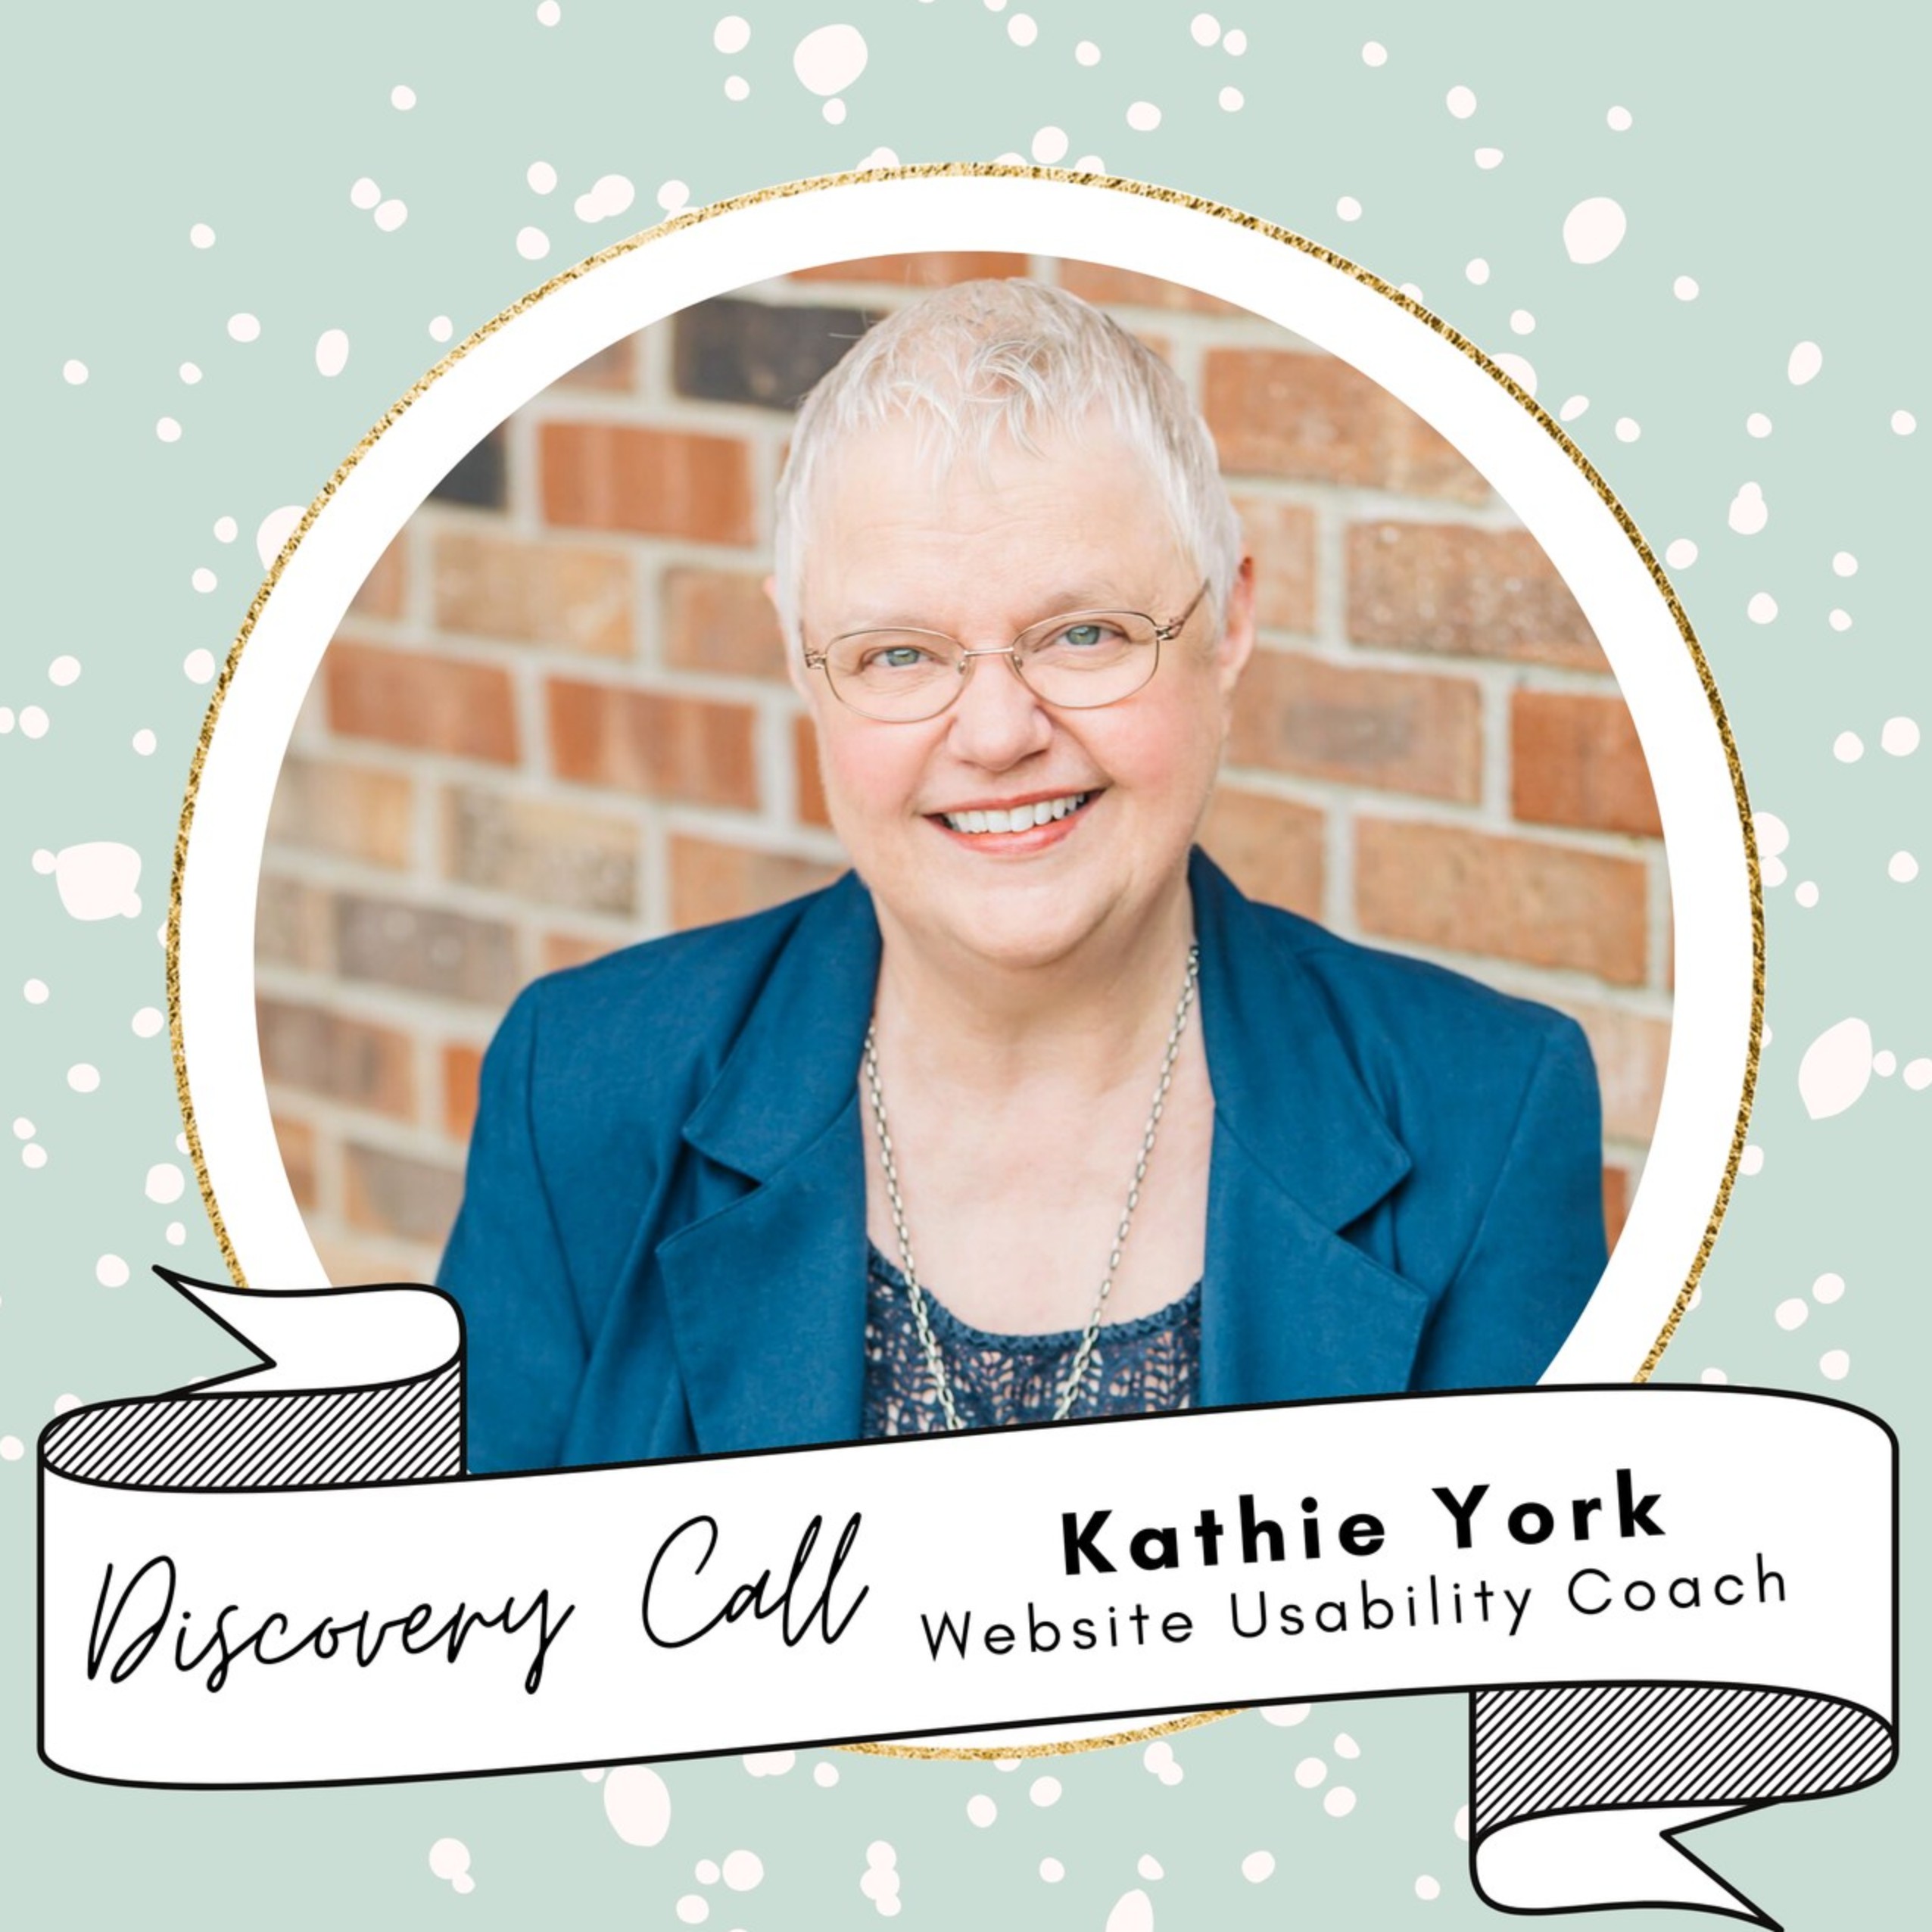 Website Usability Coach and Tips for Non-Overwhelm in your Business | Kathie York Image